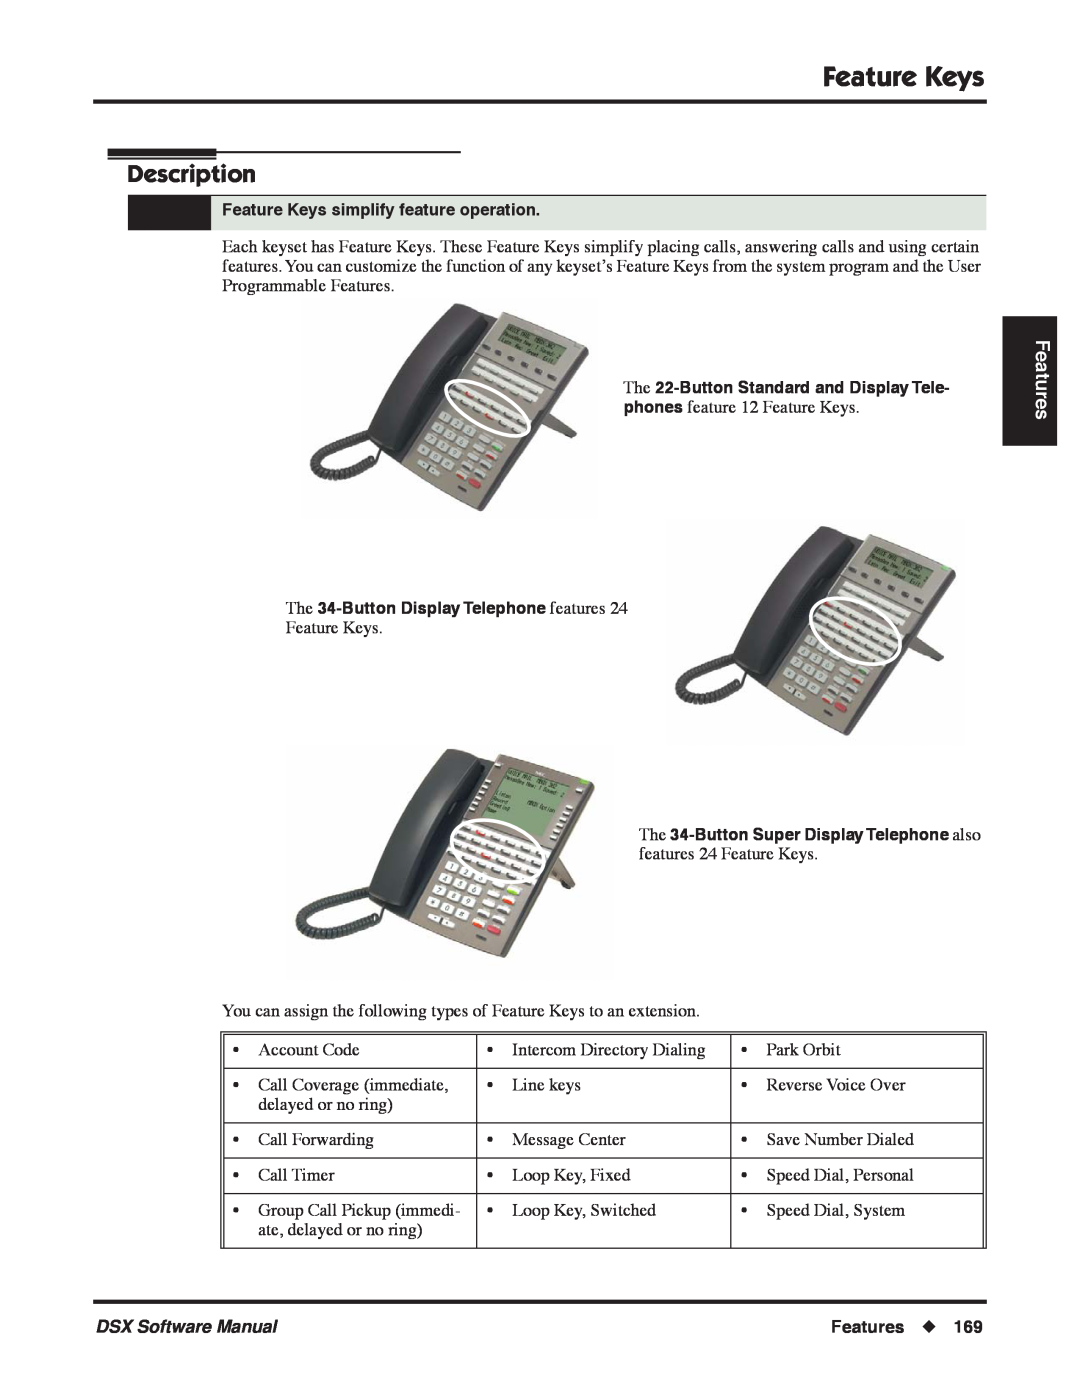 NEC P Description, Features, Feature Keys simplify feature operation, The 34-ButtonDisplay Telephone features 